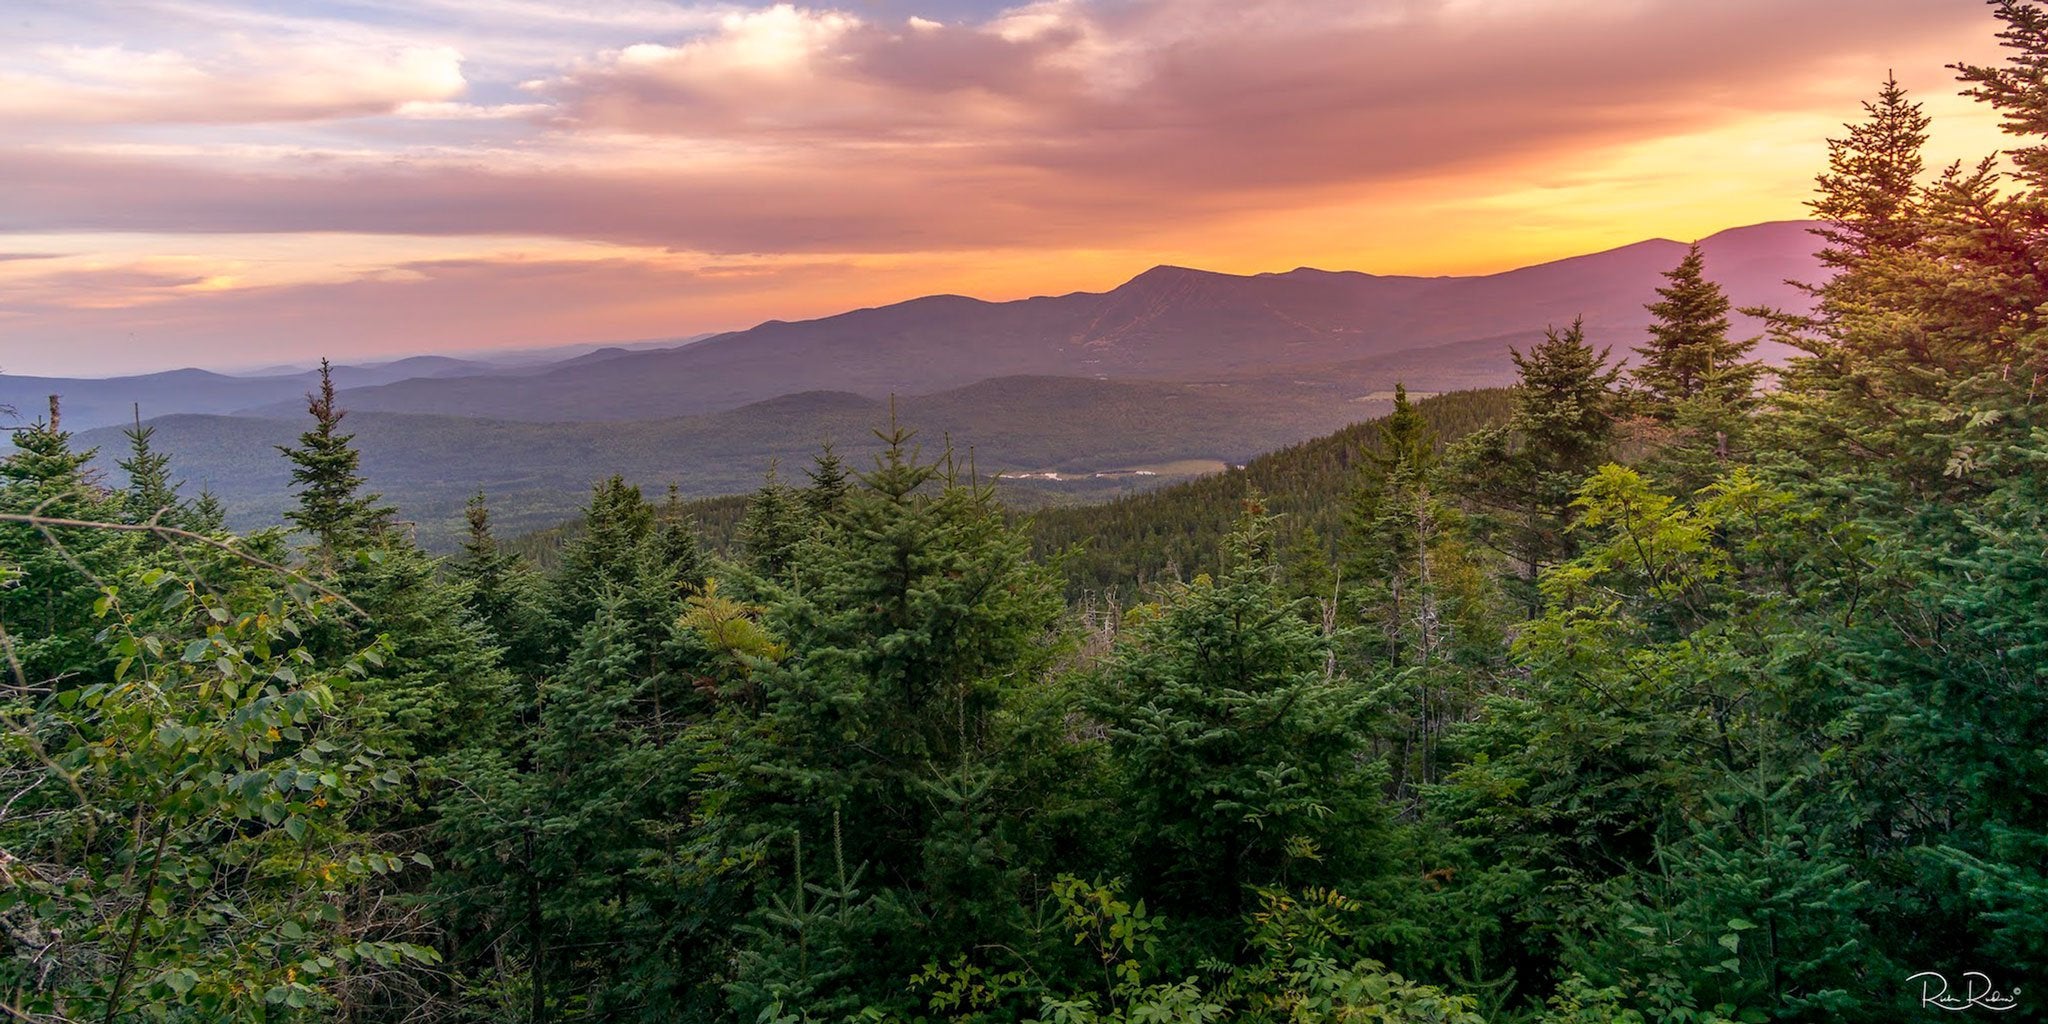 Getting the Green Light in Maine – Memories and Photos from the Appalachian Trail